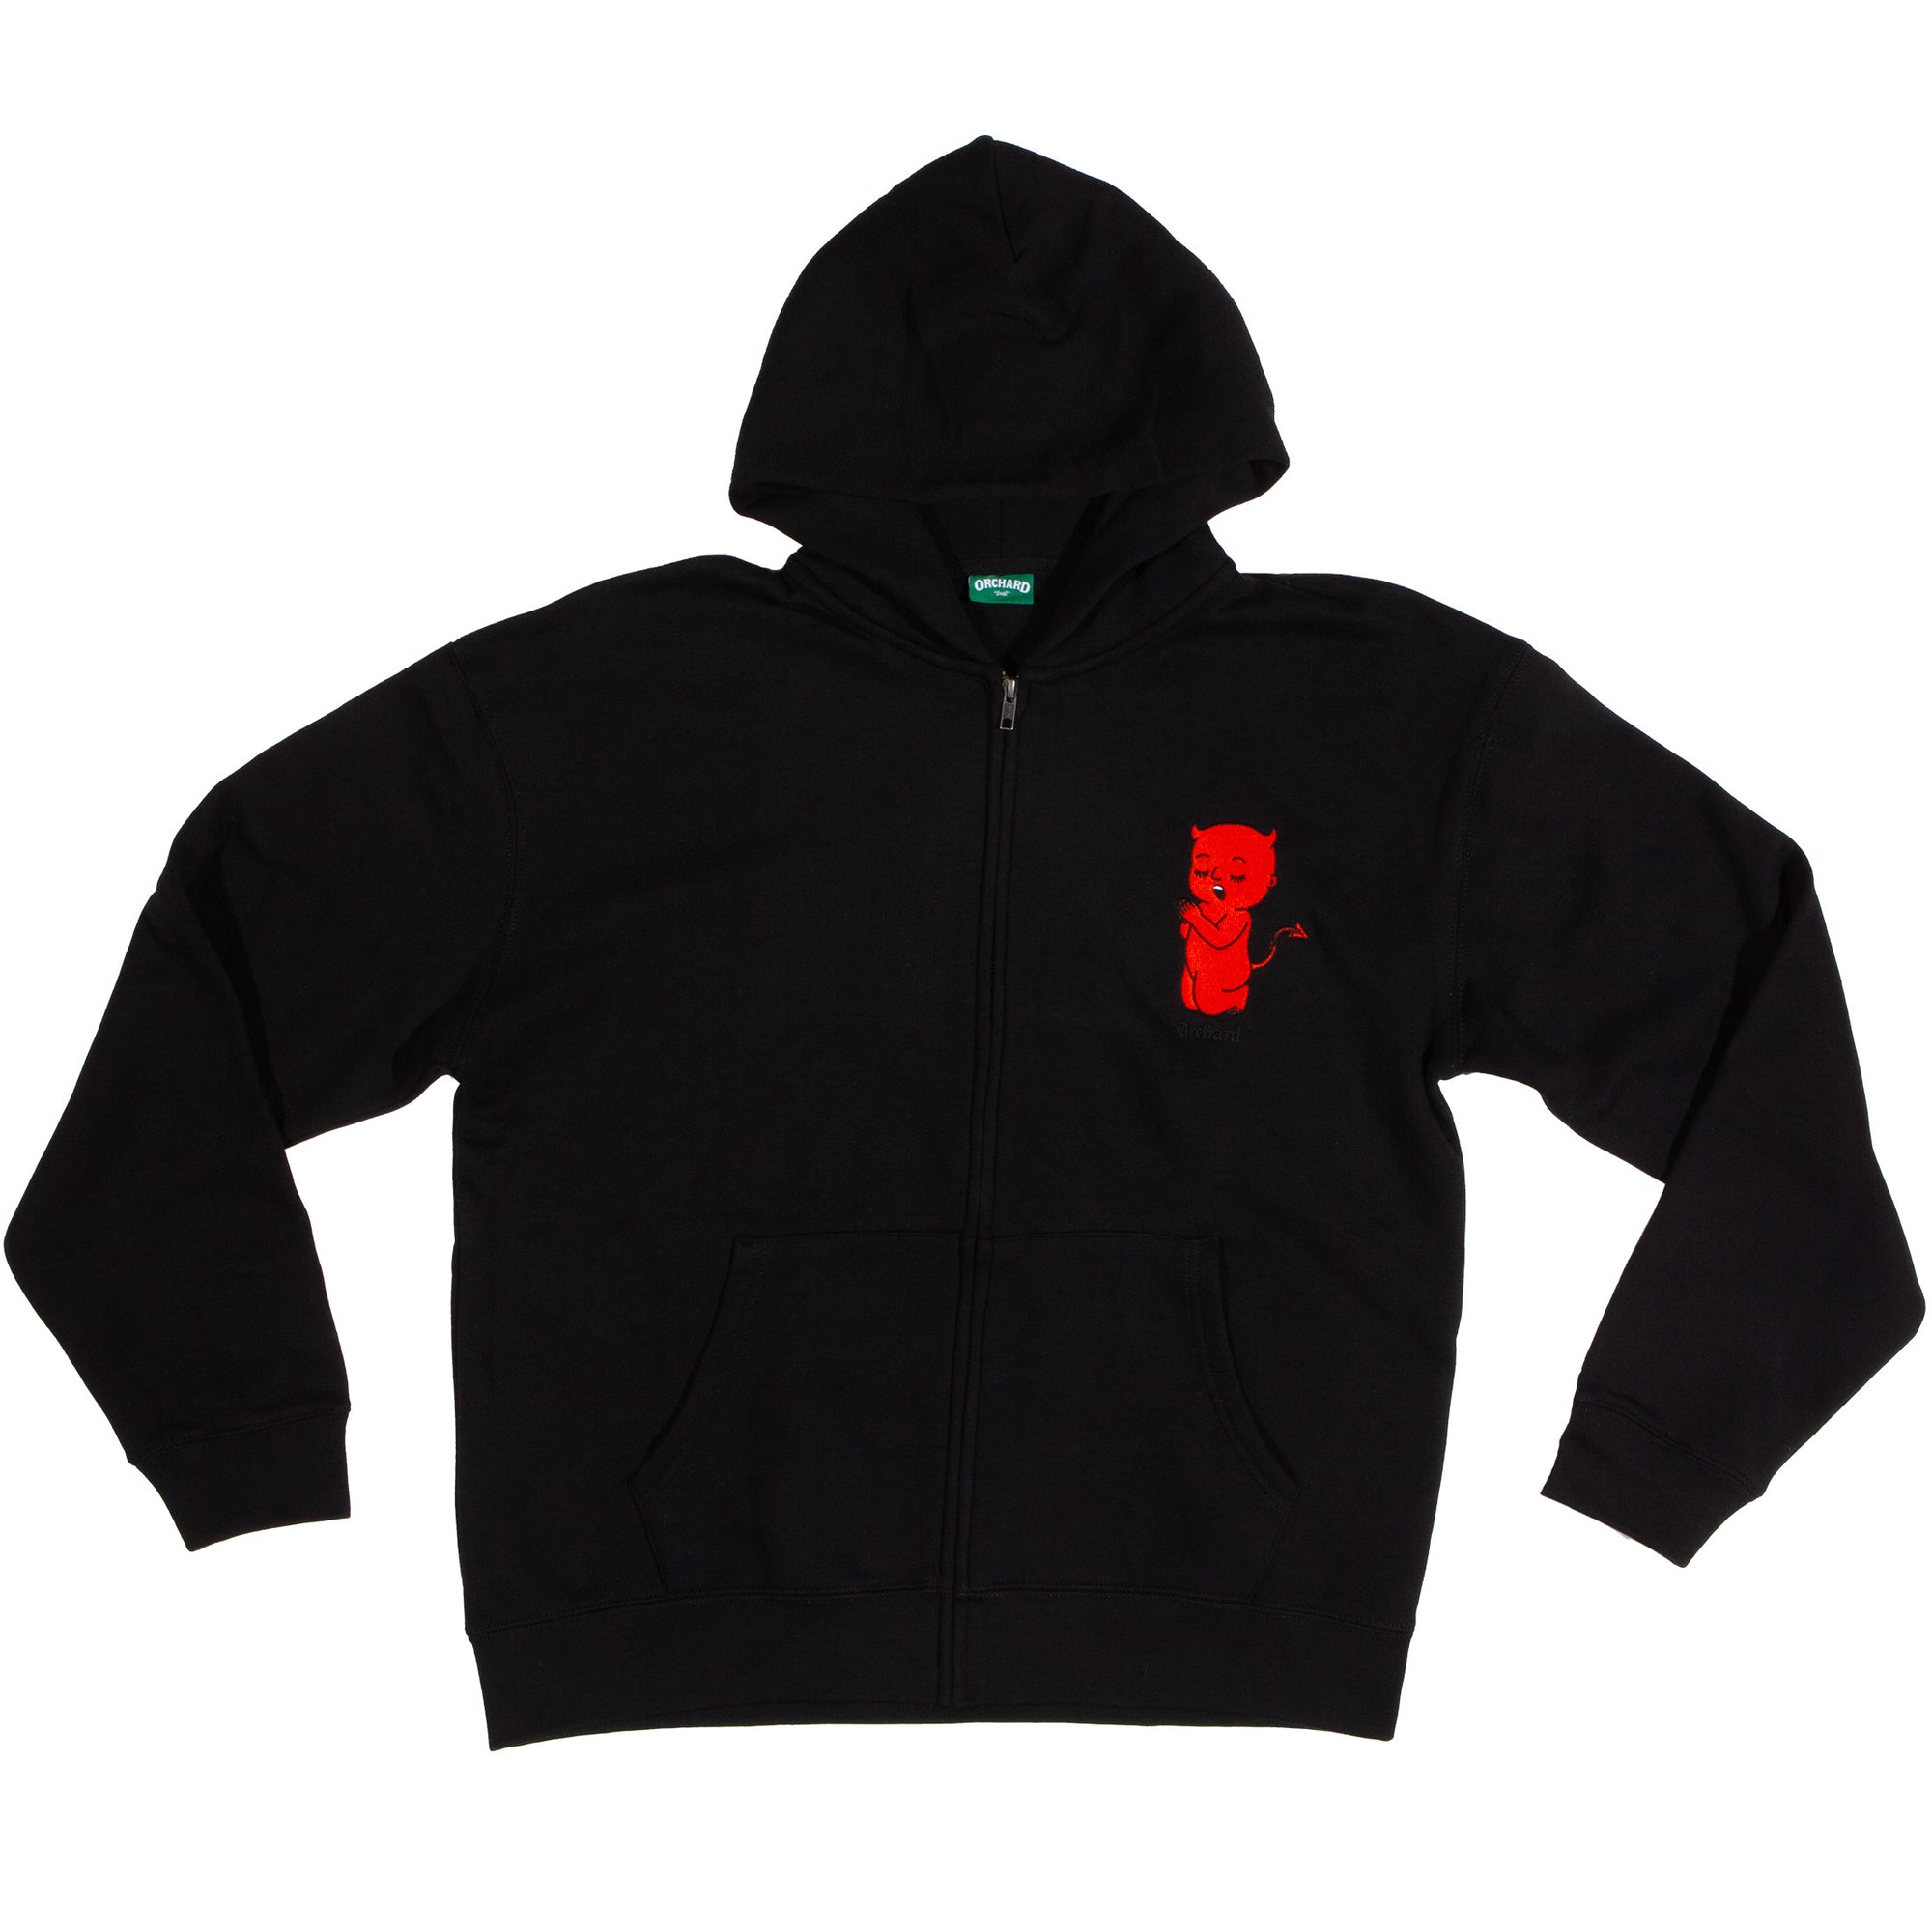 Orchard Thoughts & Prayers Heavy Zip Hoodie Black